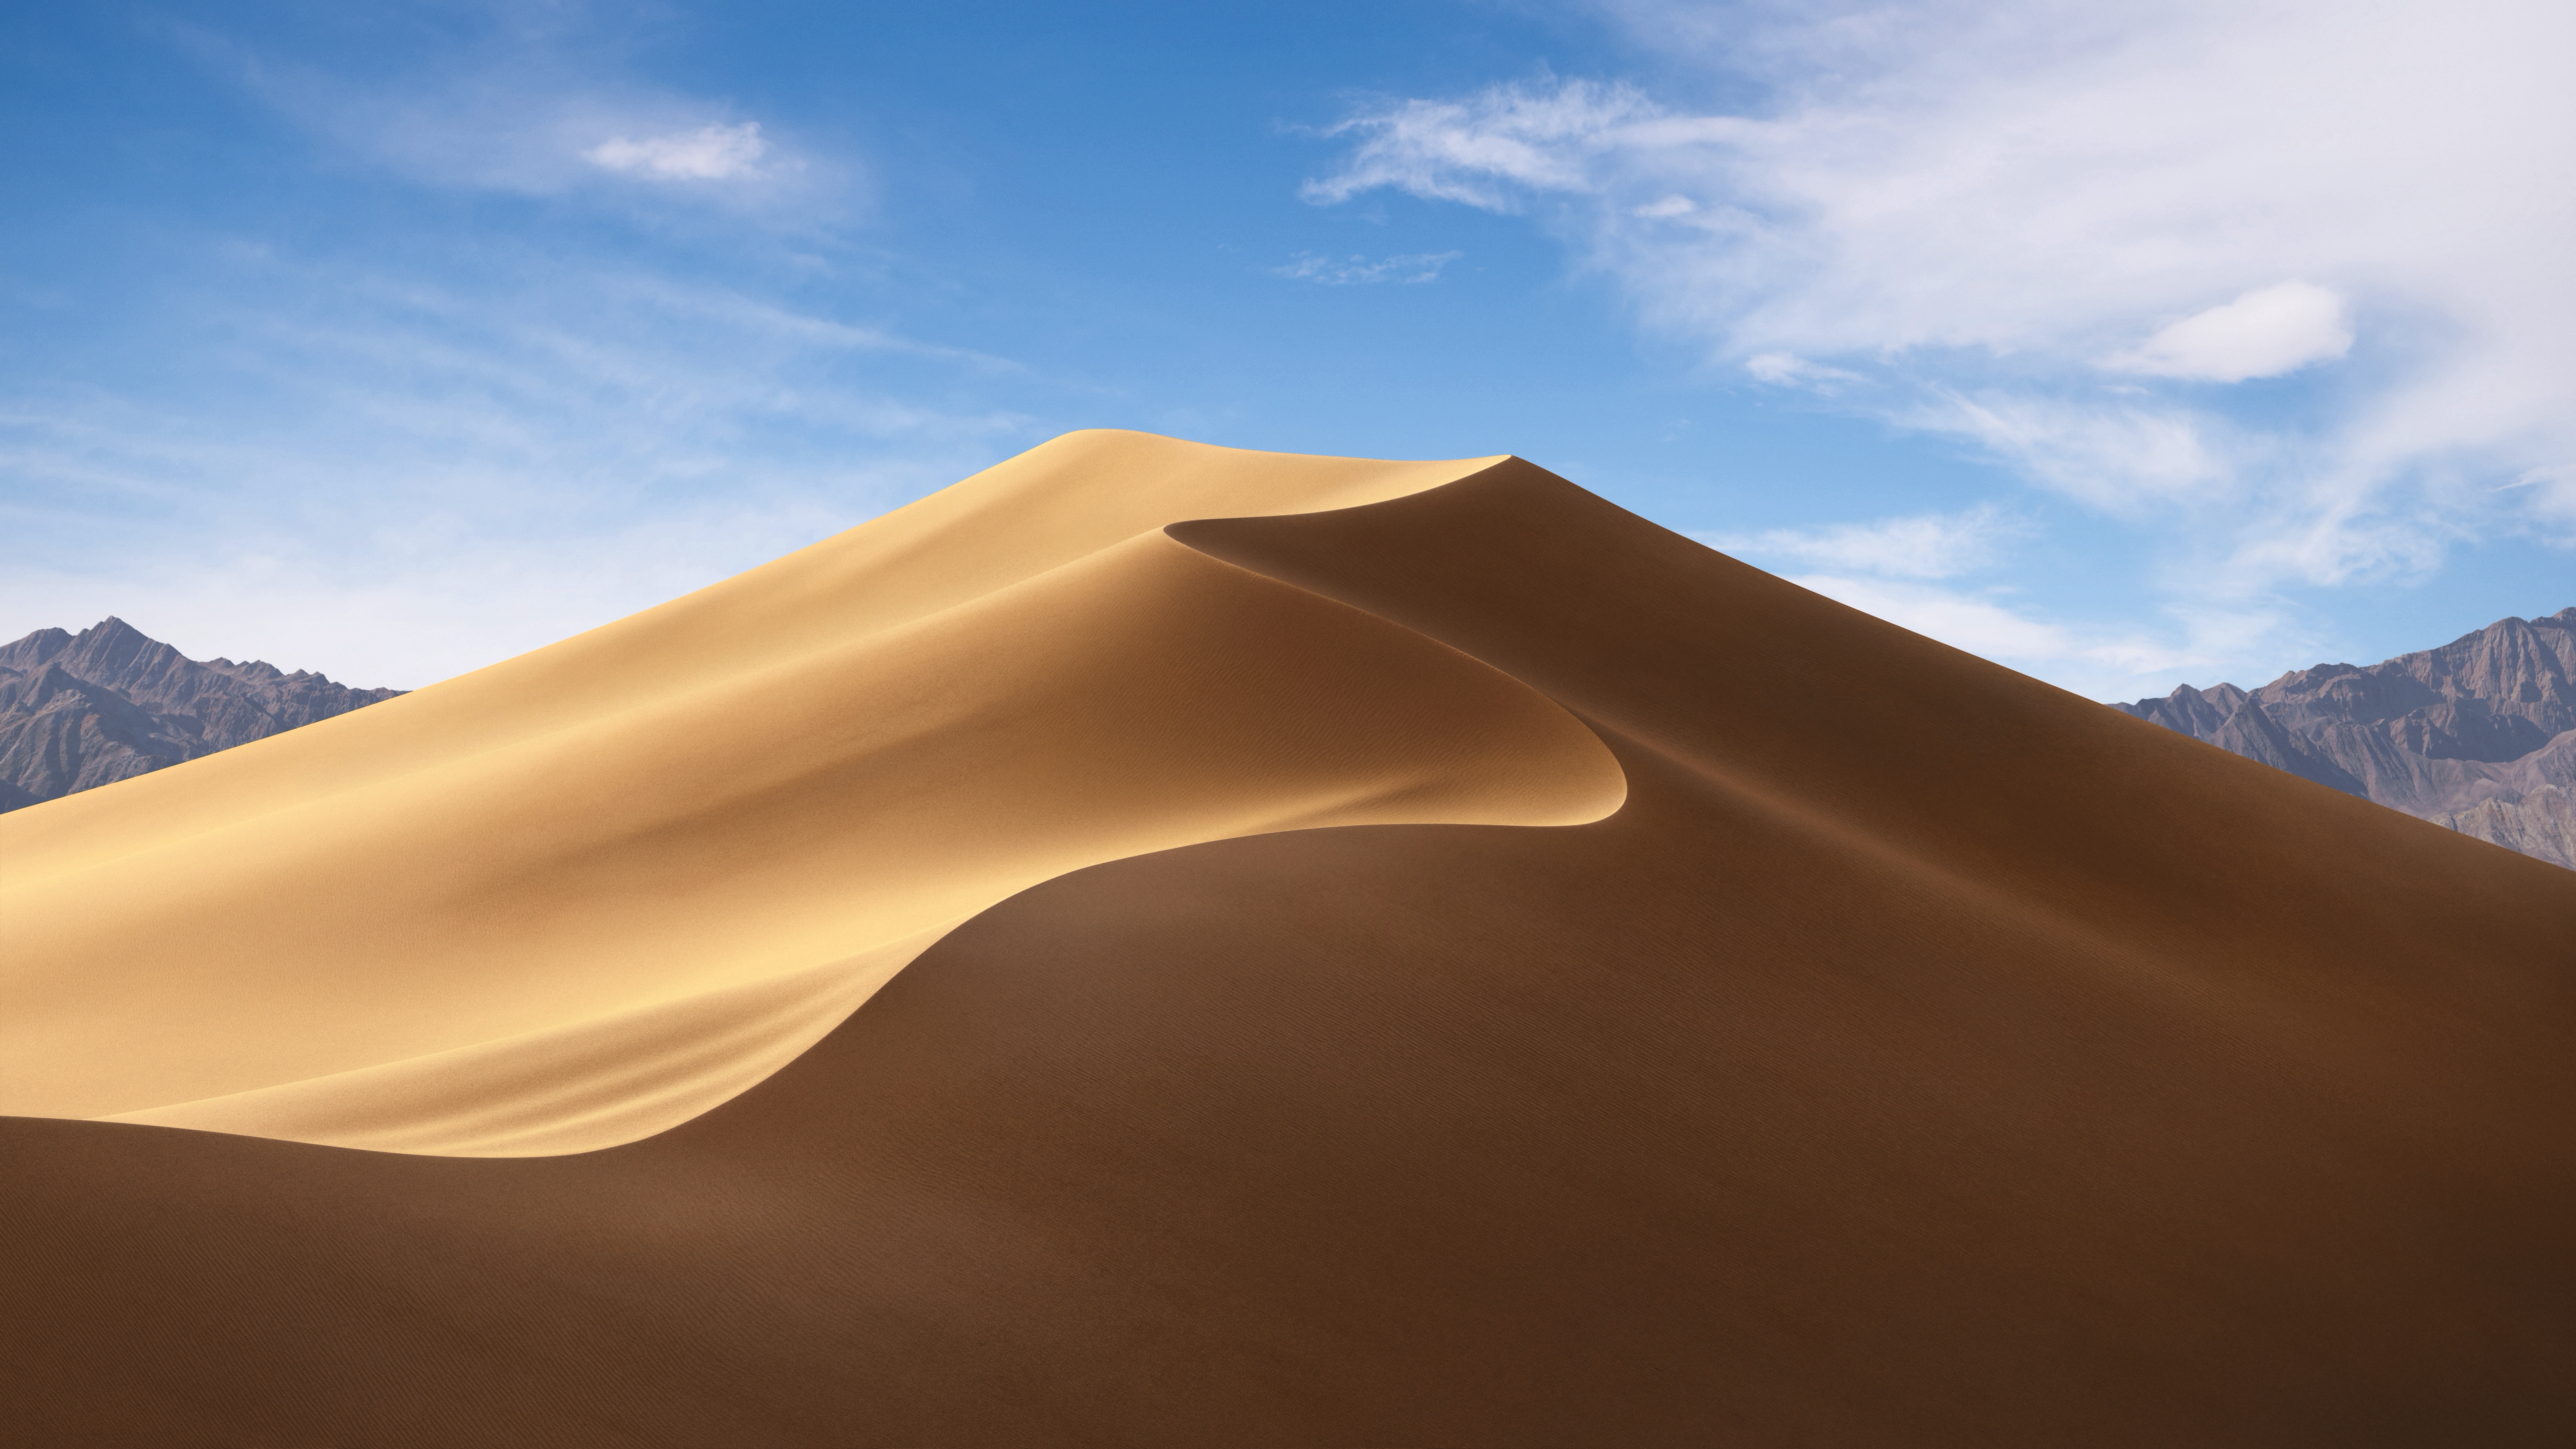 Mojave includes an assortment of new wallpapers.